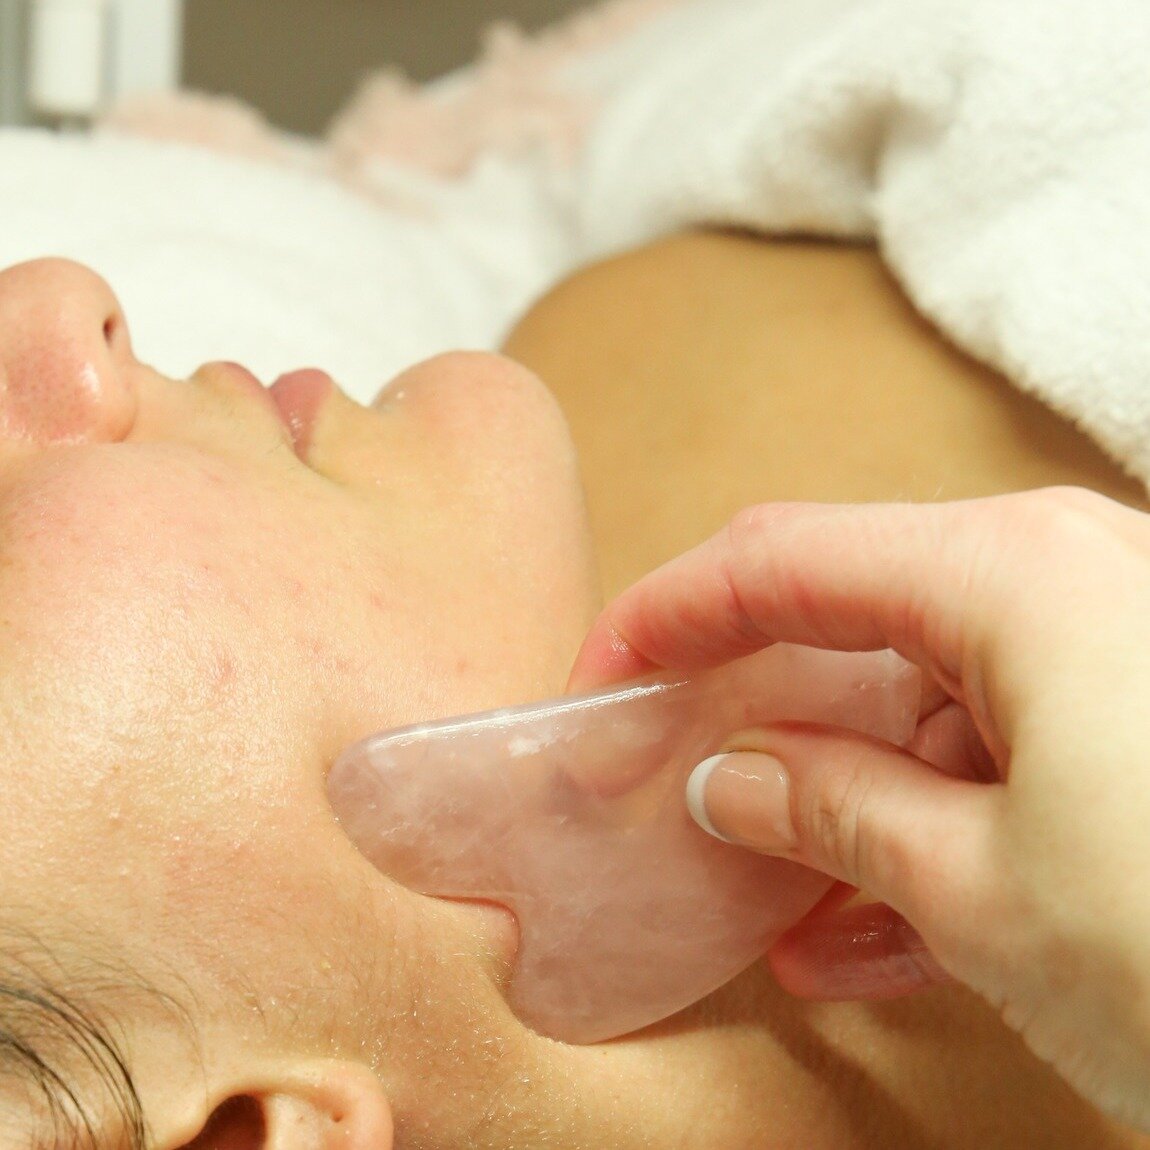 Did you know that facial massage can help promote healthy, glowing skin? Not only does it feel amazing, but it can also boost circulation, reduce puffiness, and improve lymphatic drainage. At Skindulge , we offer a range of facial massages that are t